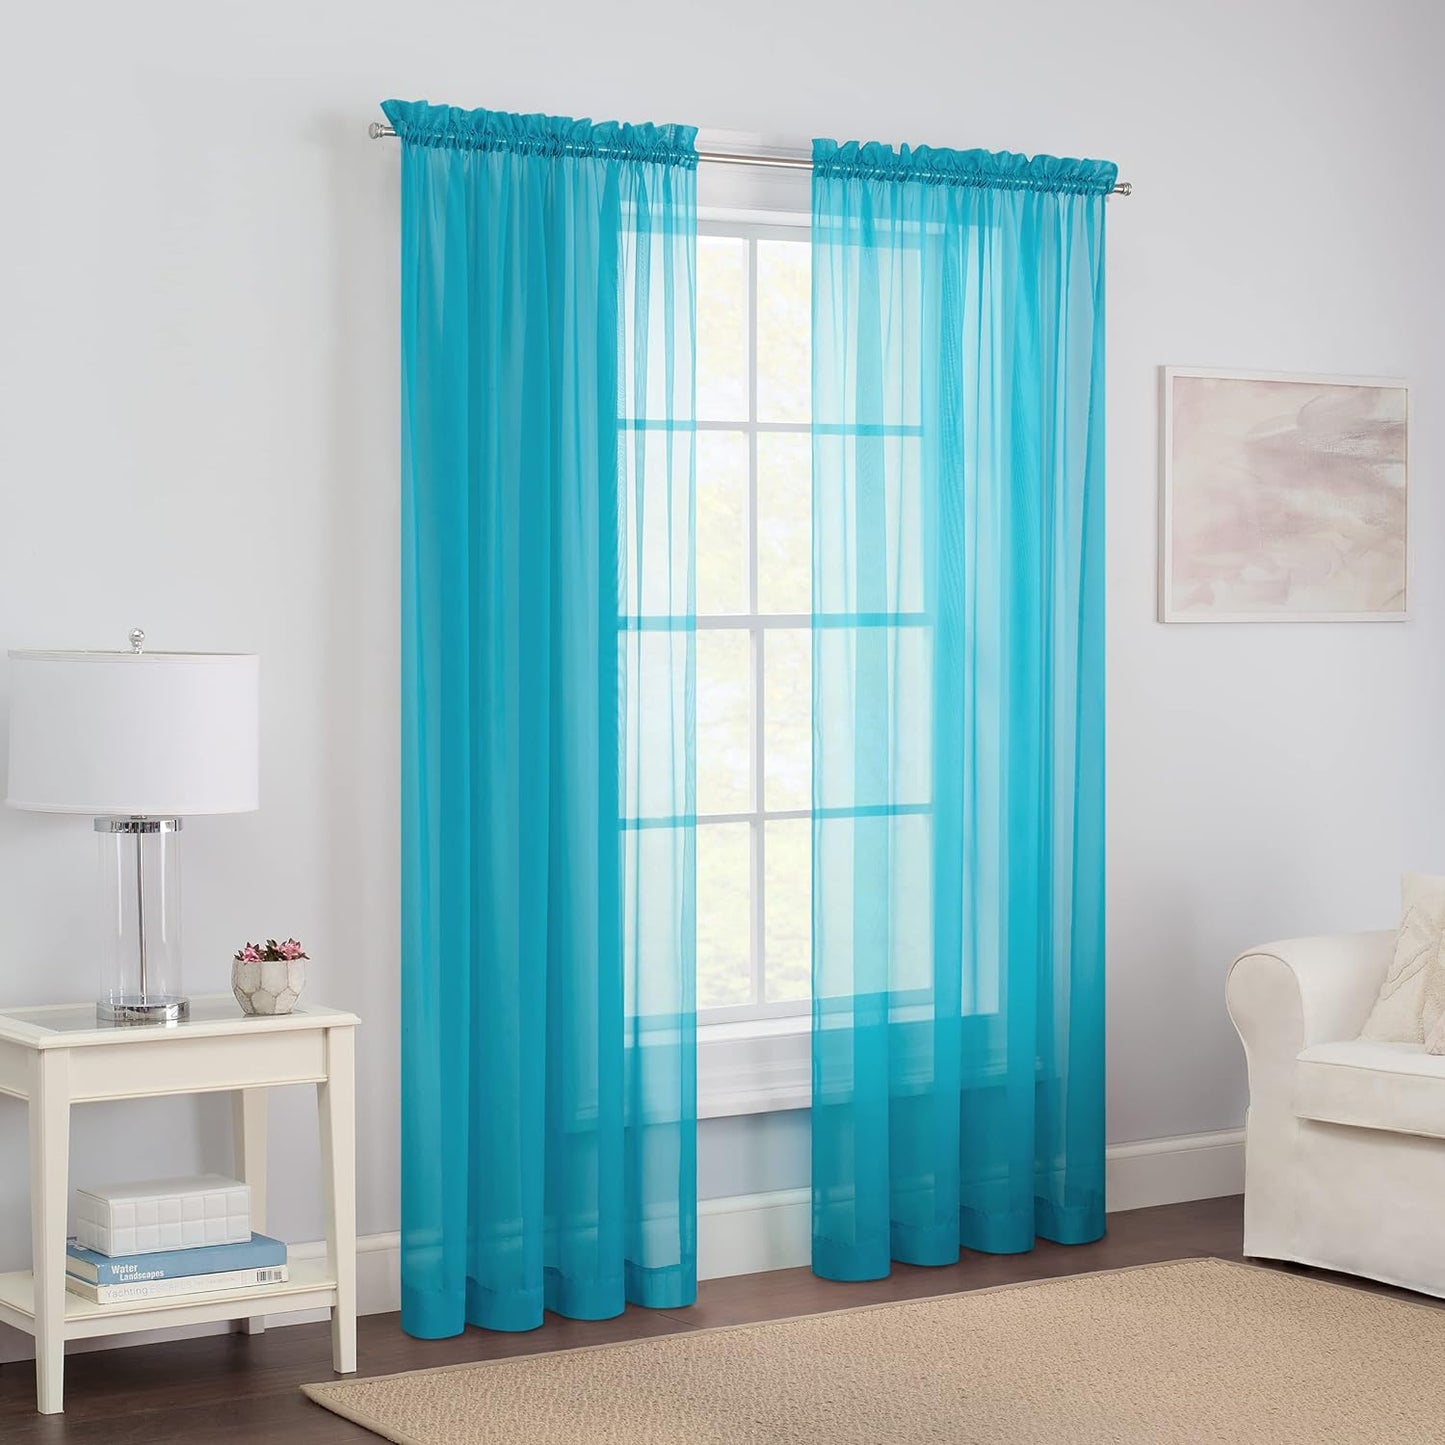 Pairs to Go Victoria Voile Modern Sheer Rod Pocket Window Curtains for Living Room (2 Panels), 59 in X 95 In, White  Ellery Homestyles Turquoise Curtains 59 In X 84 In